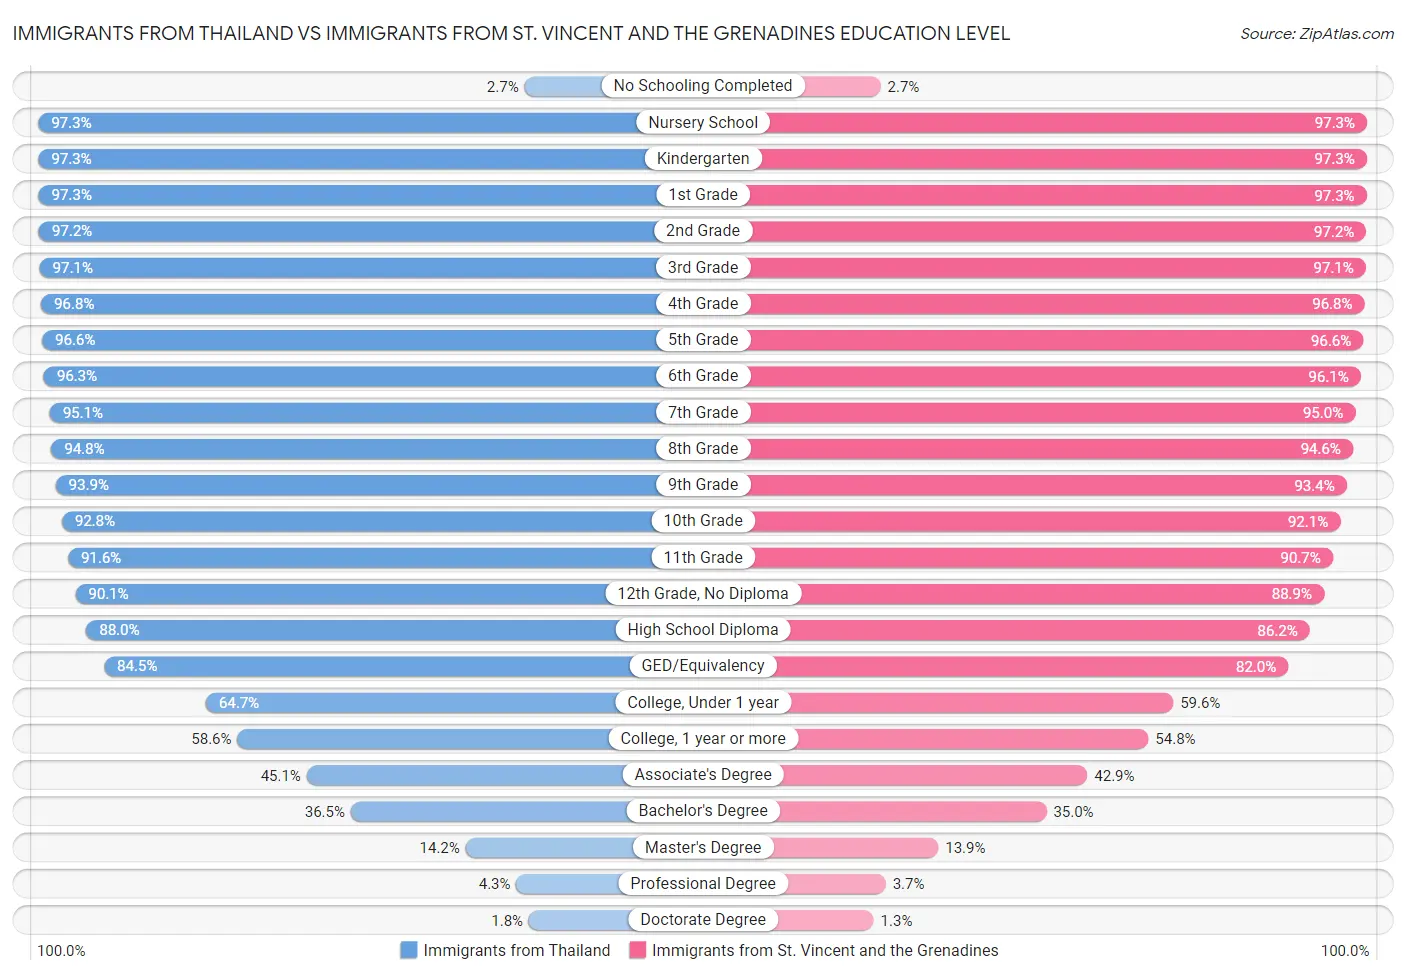 Immigrants from Thailand vs Immigrants from St. Vincent and the Grenadines Education Level